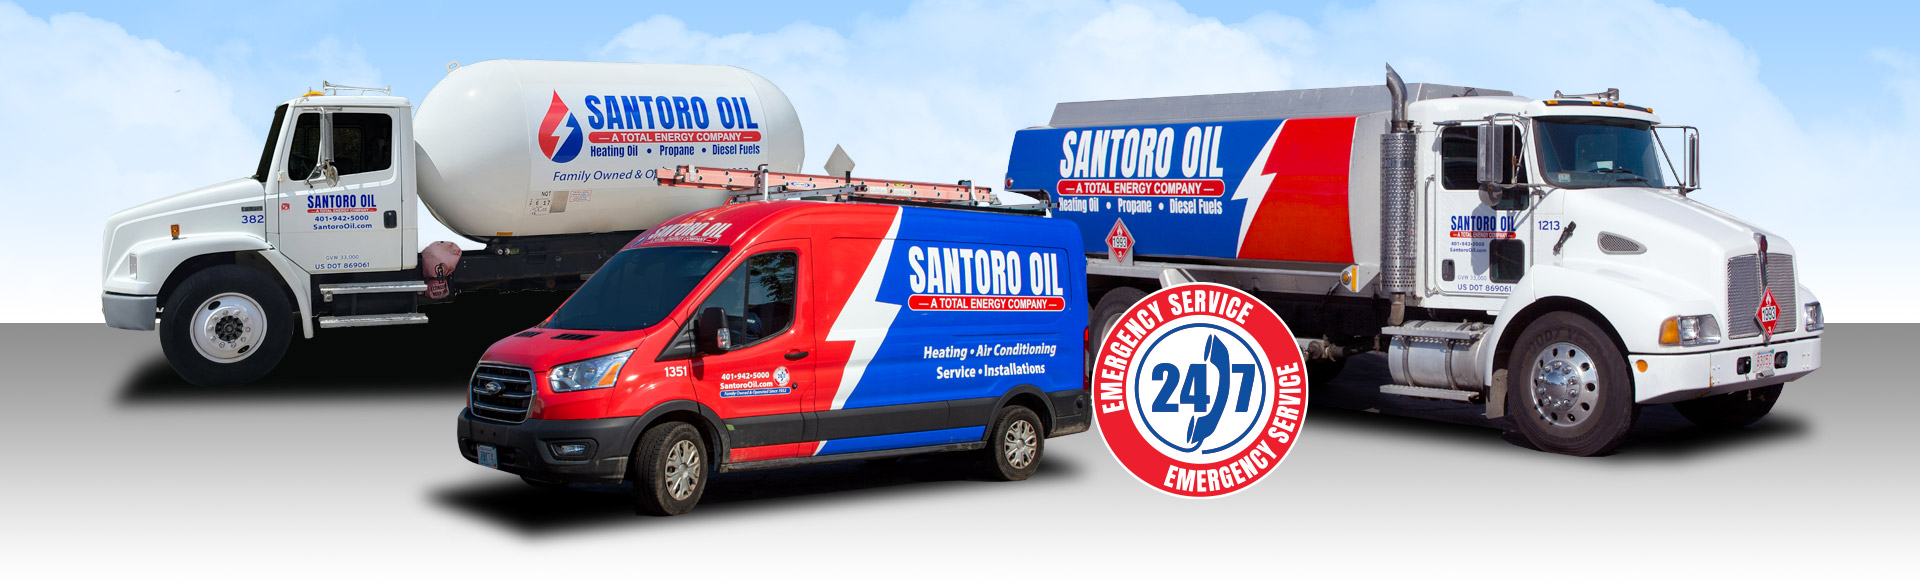 Santoro Oil's fleet of oil delivery trucks, propane delivery trucks and service vehicles